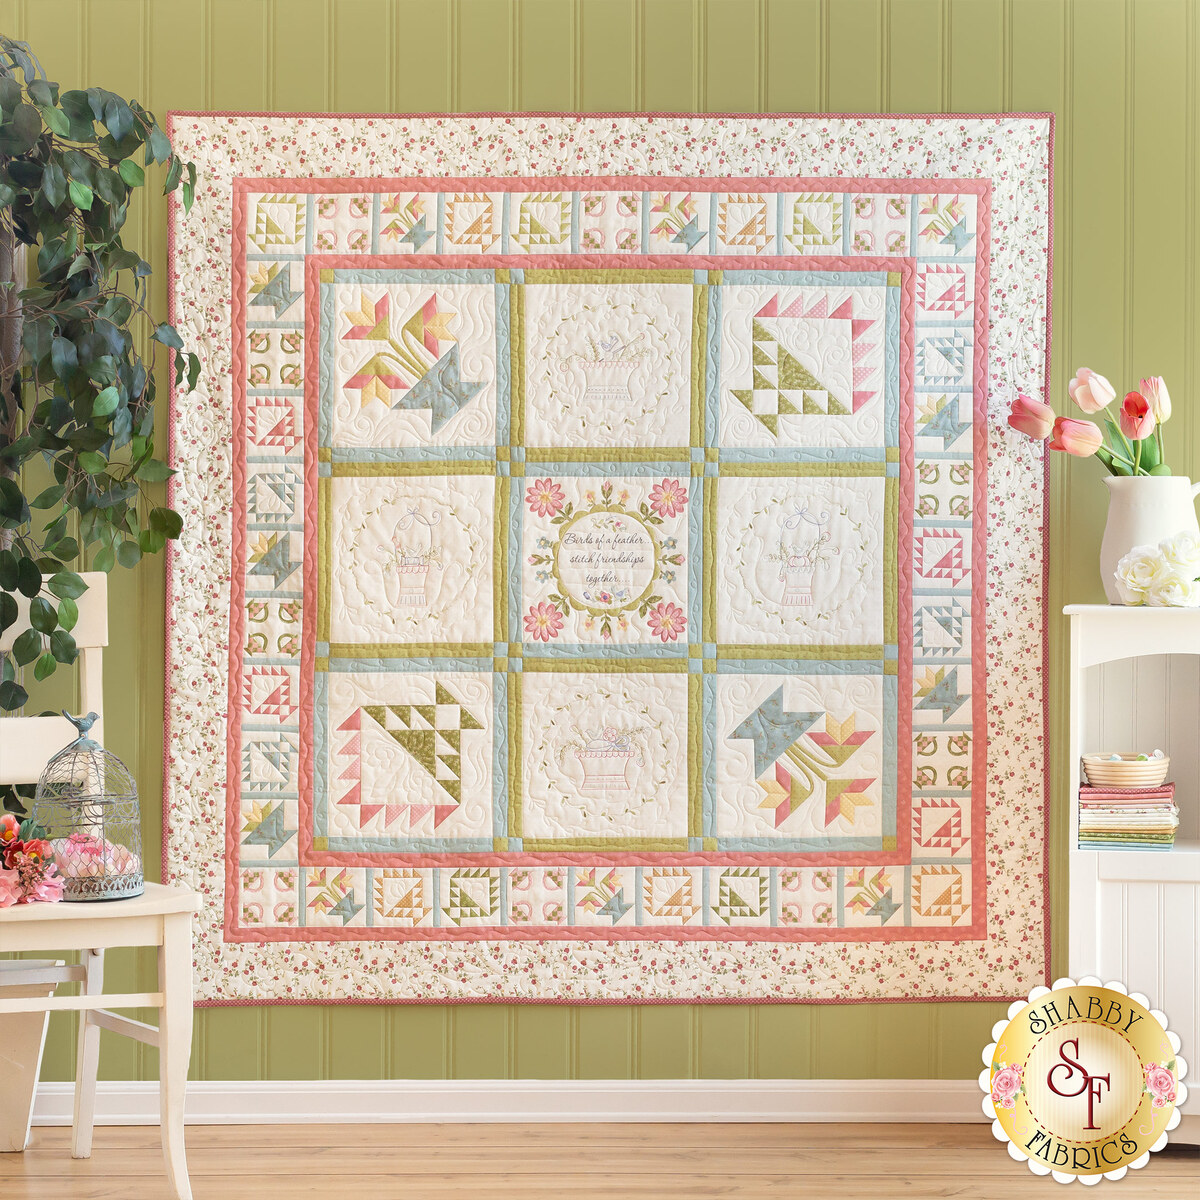 Quilting With Panels - Quick Quilts Sewn With Pre-Prints